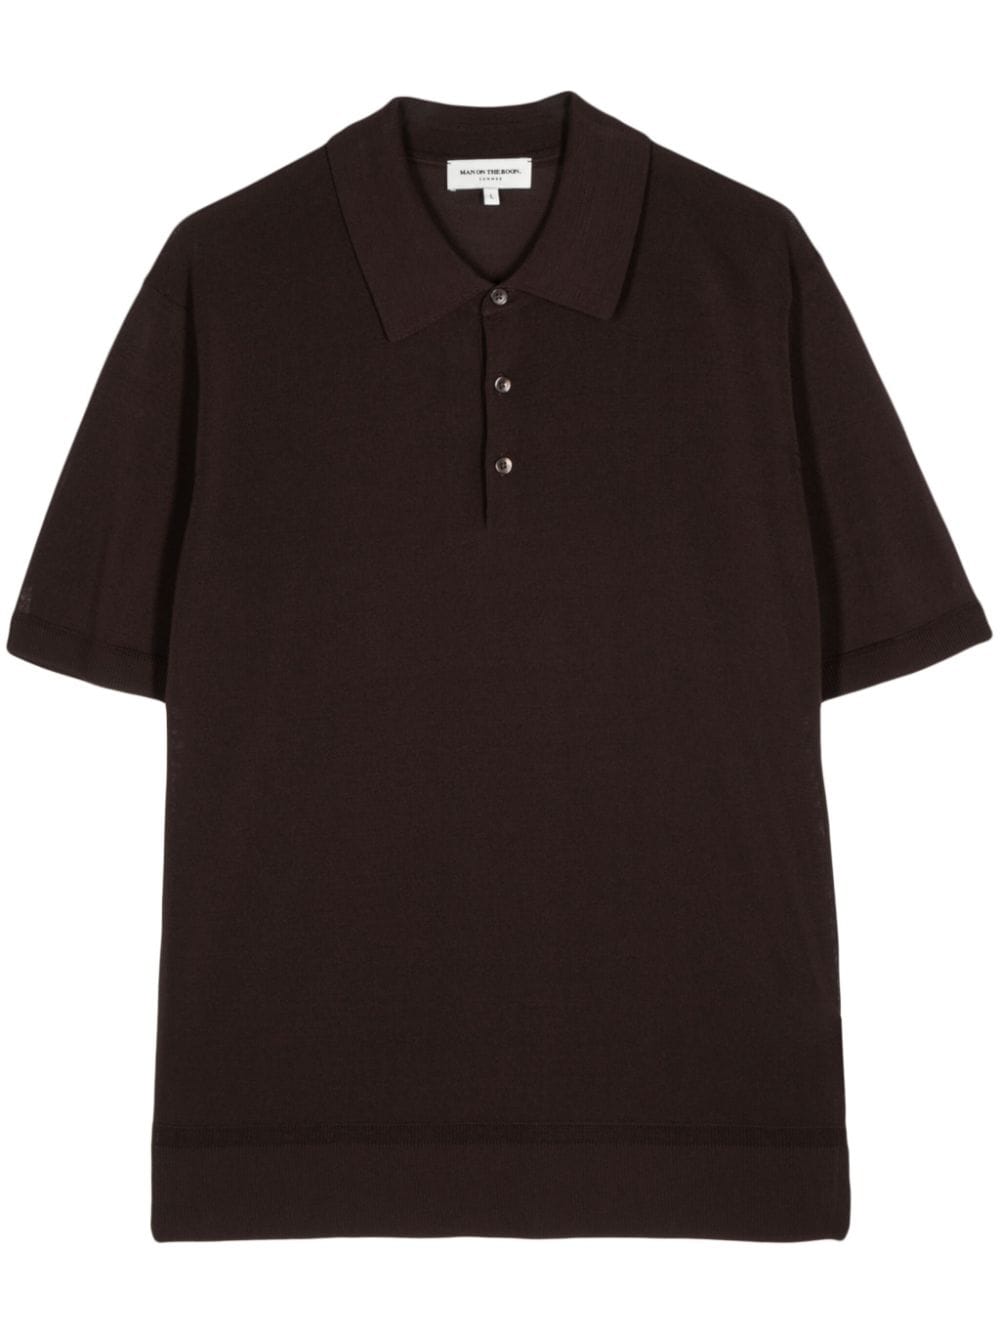 Man On The Boon. Short-sleeve Polo Shirt In Brown